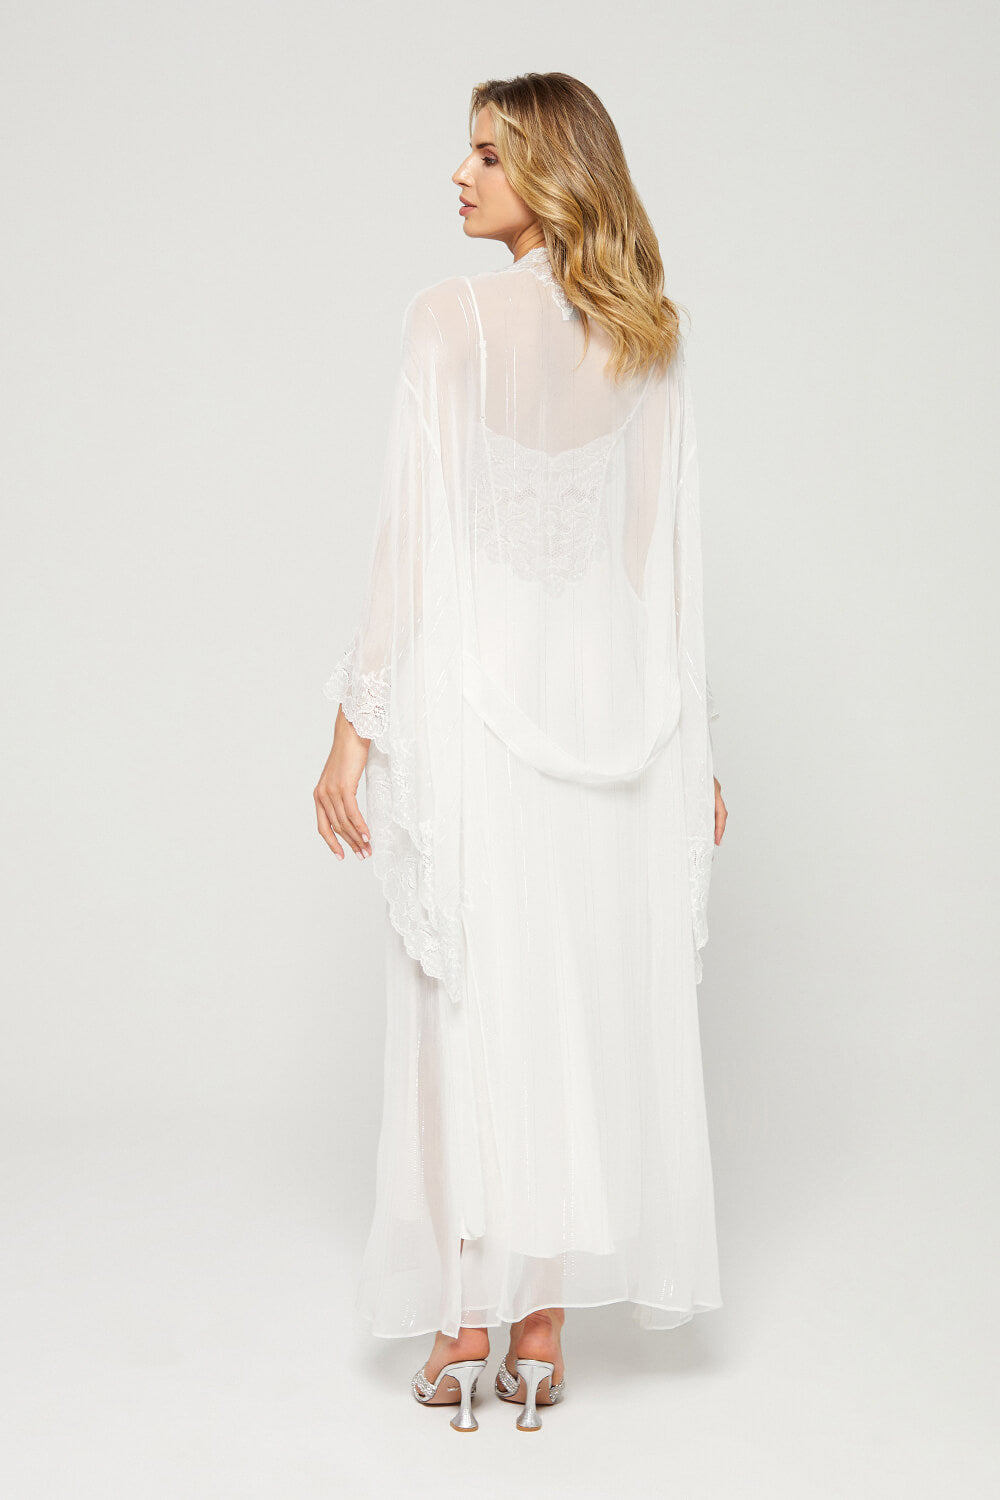 Adela - Trimmed Silk Chiffon Sheer  Robe Set - Silver Lace on Off White